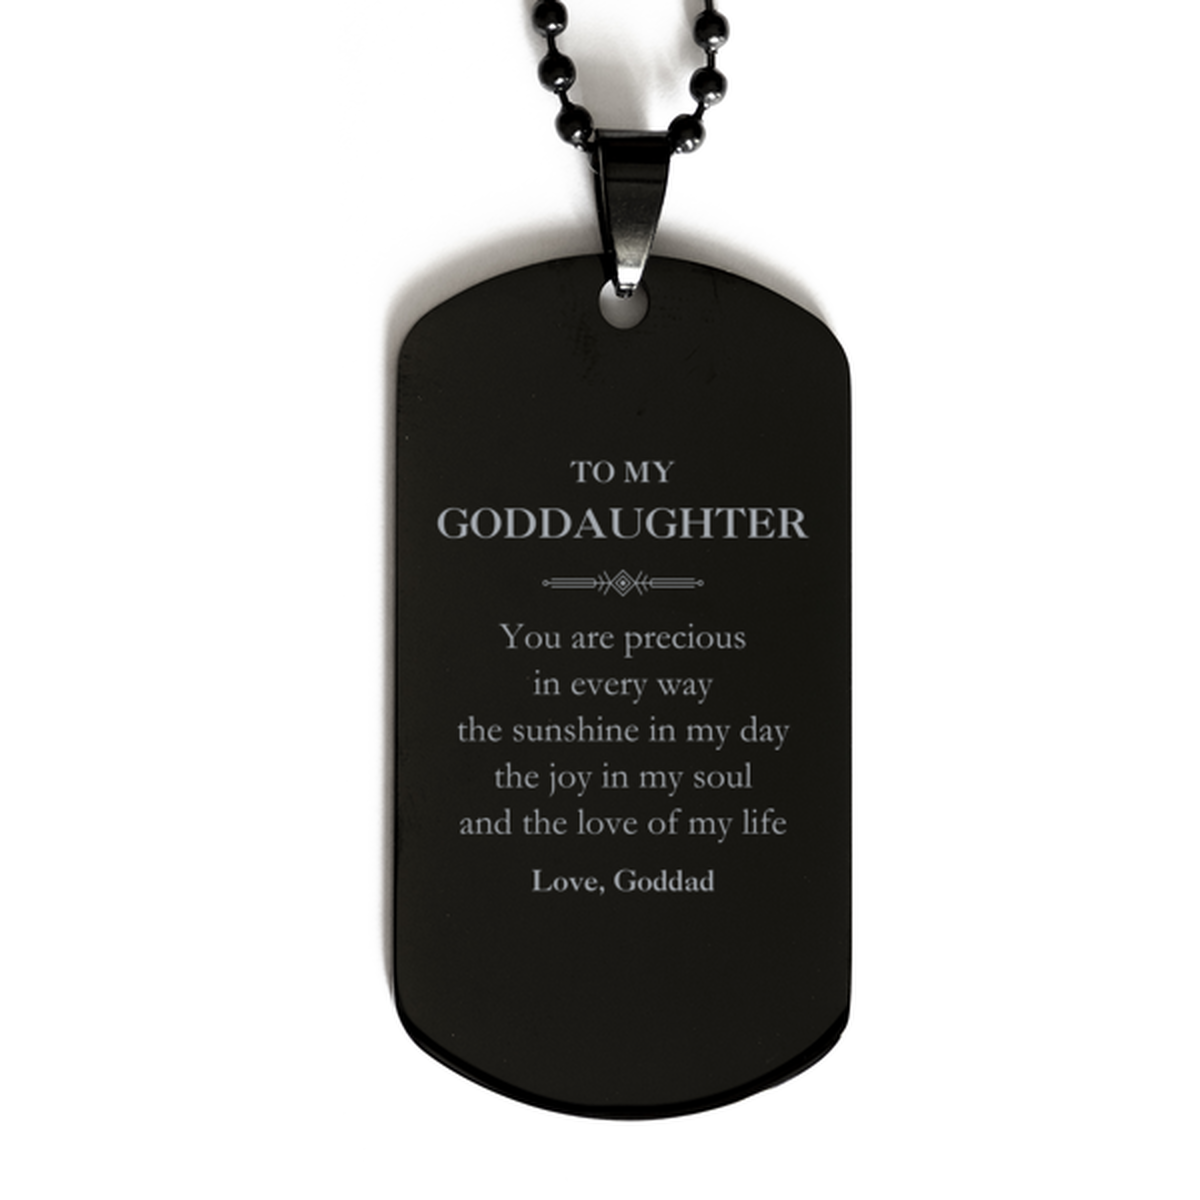 Graduation Gifts for Goddaughter Black Dog Tag Present from Goddad, Christmas Goddaughter Birthday Gifts Goddaughter You are precious in every way the sunshine in my day. Love, Goddad